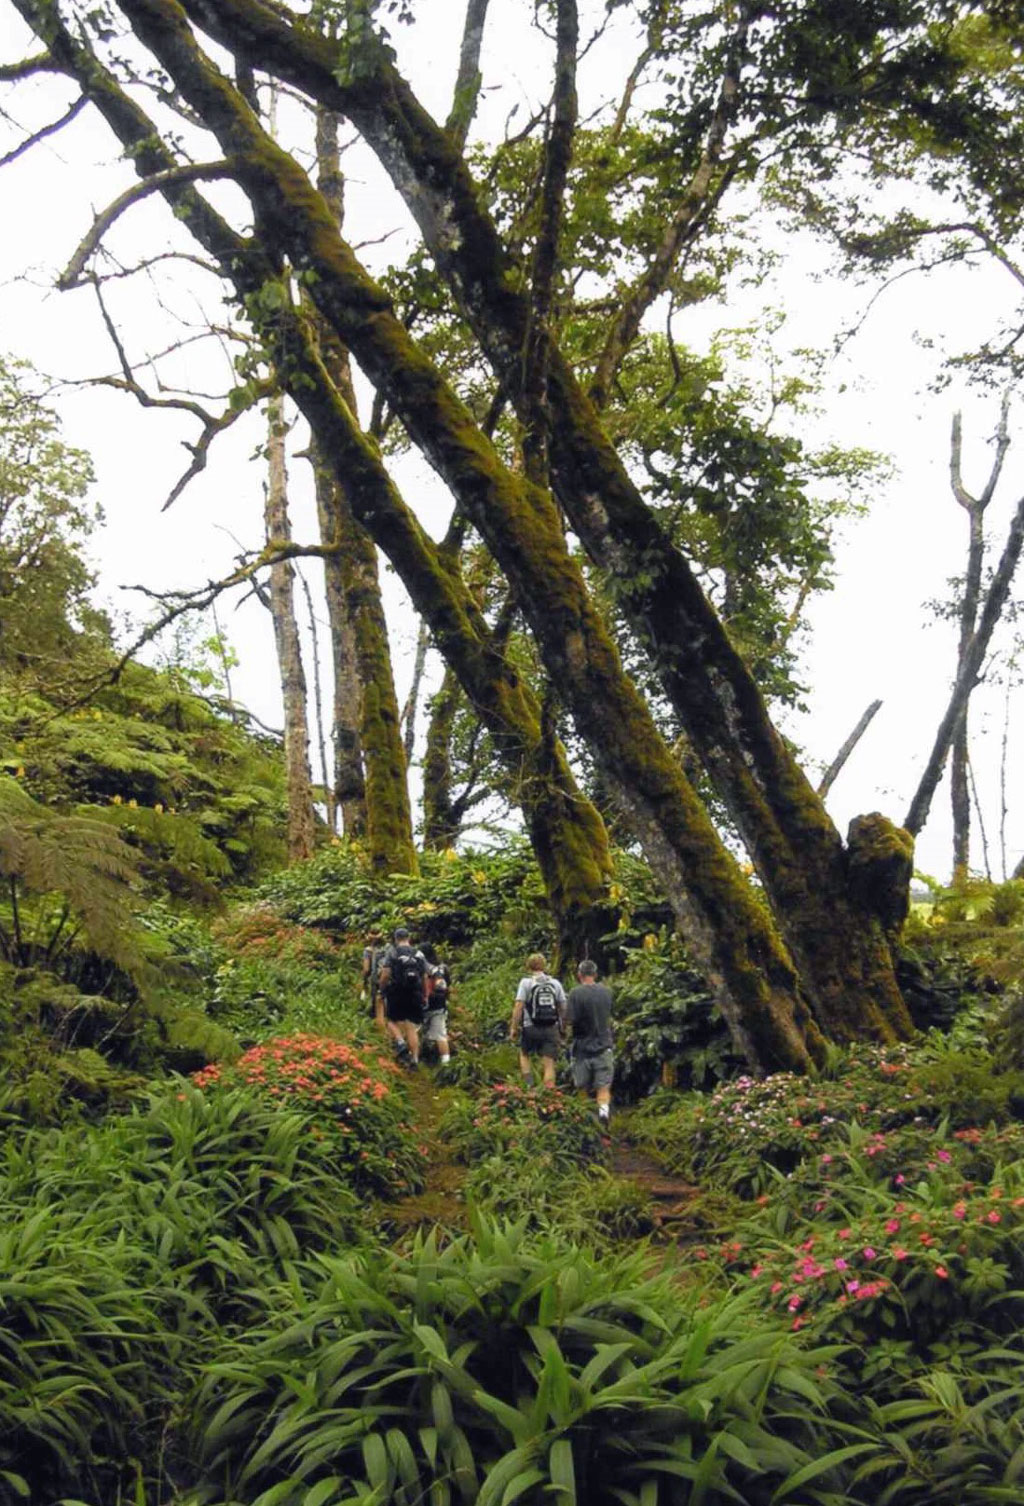 View of hikers on Hamakua Ditch Trail from below